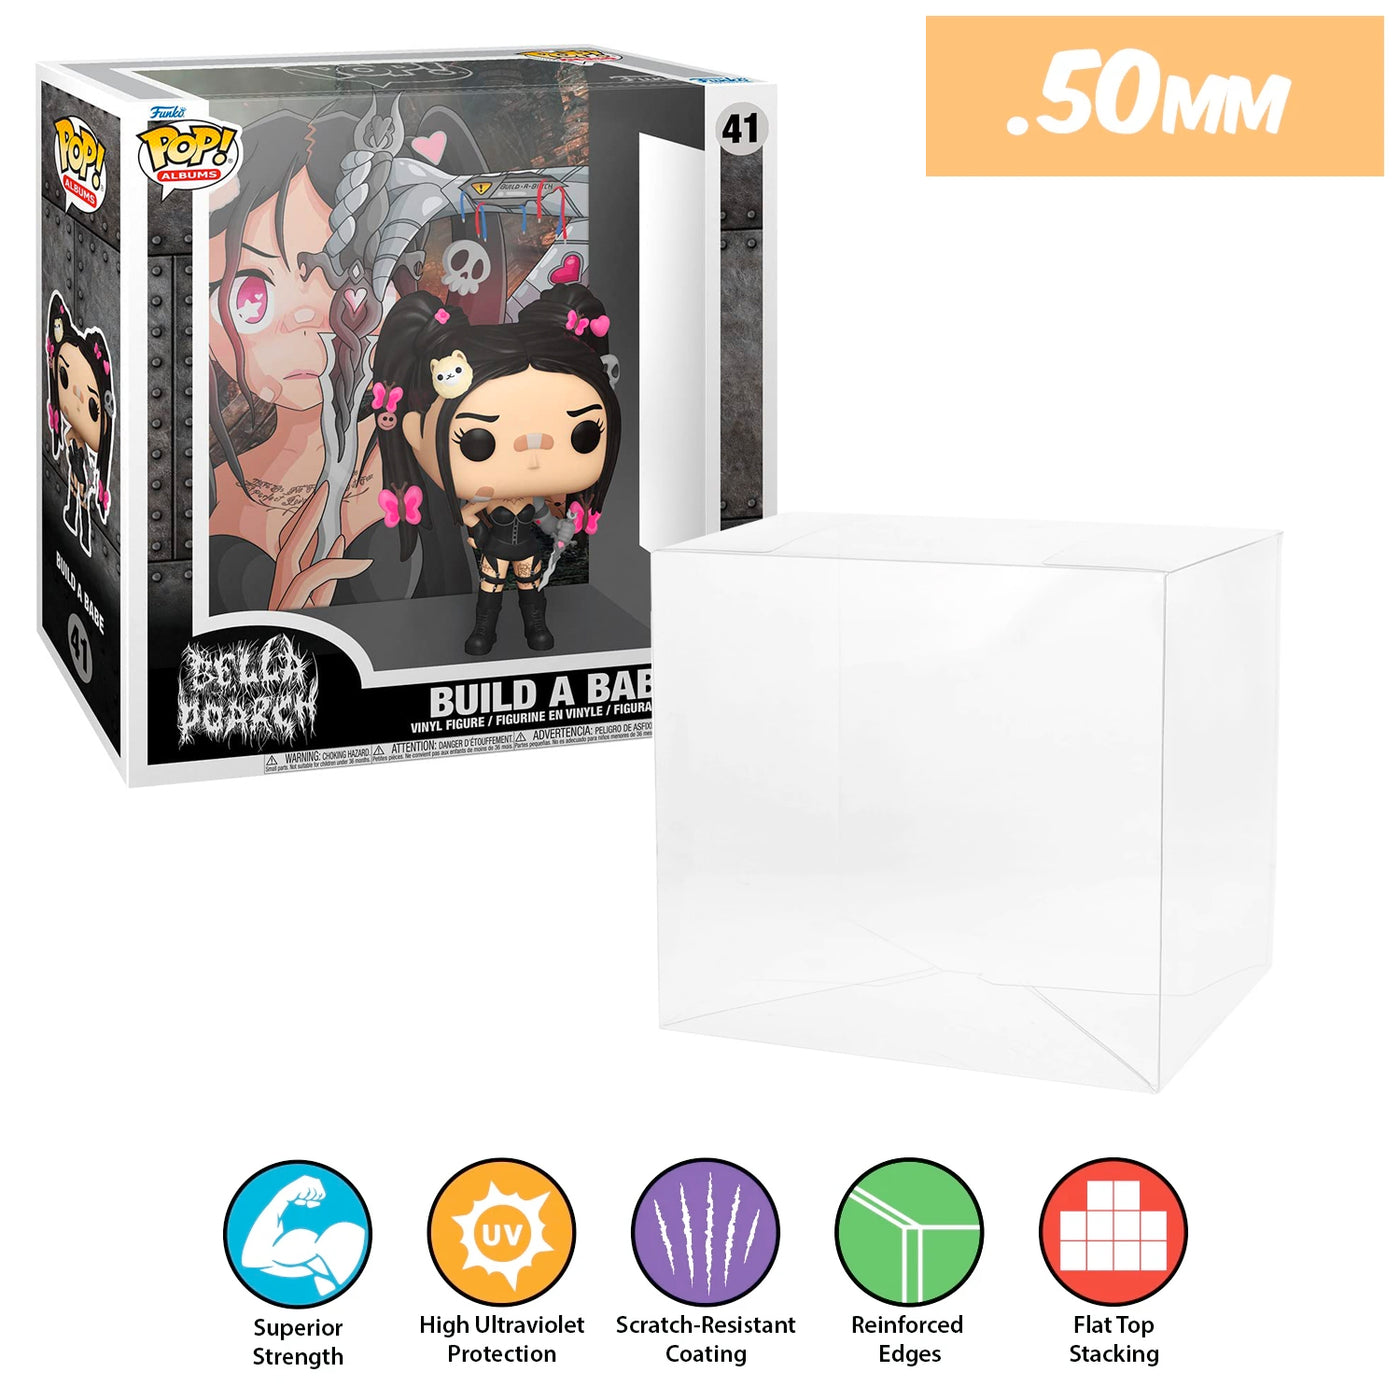 41 bella poarch build a babe pop albums best funko pop protectors thick strong uv scratch flat top stack vinyl display geek plastic shield vaulted eco armor fits collect protect display case kollector protector